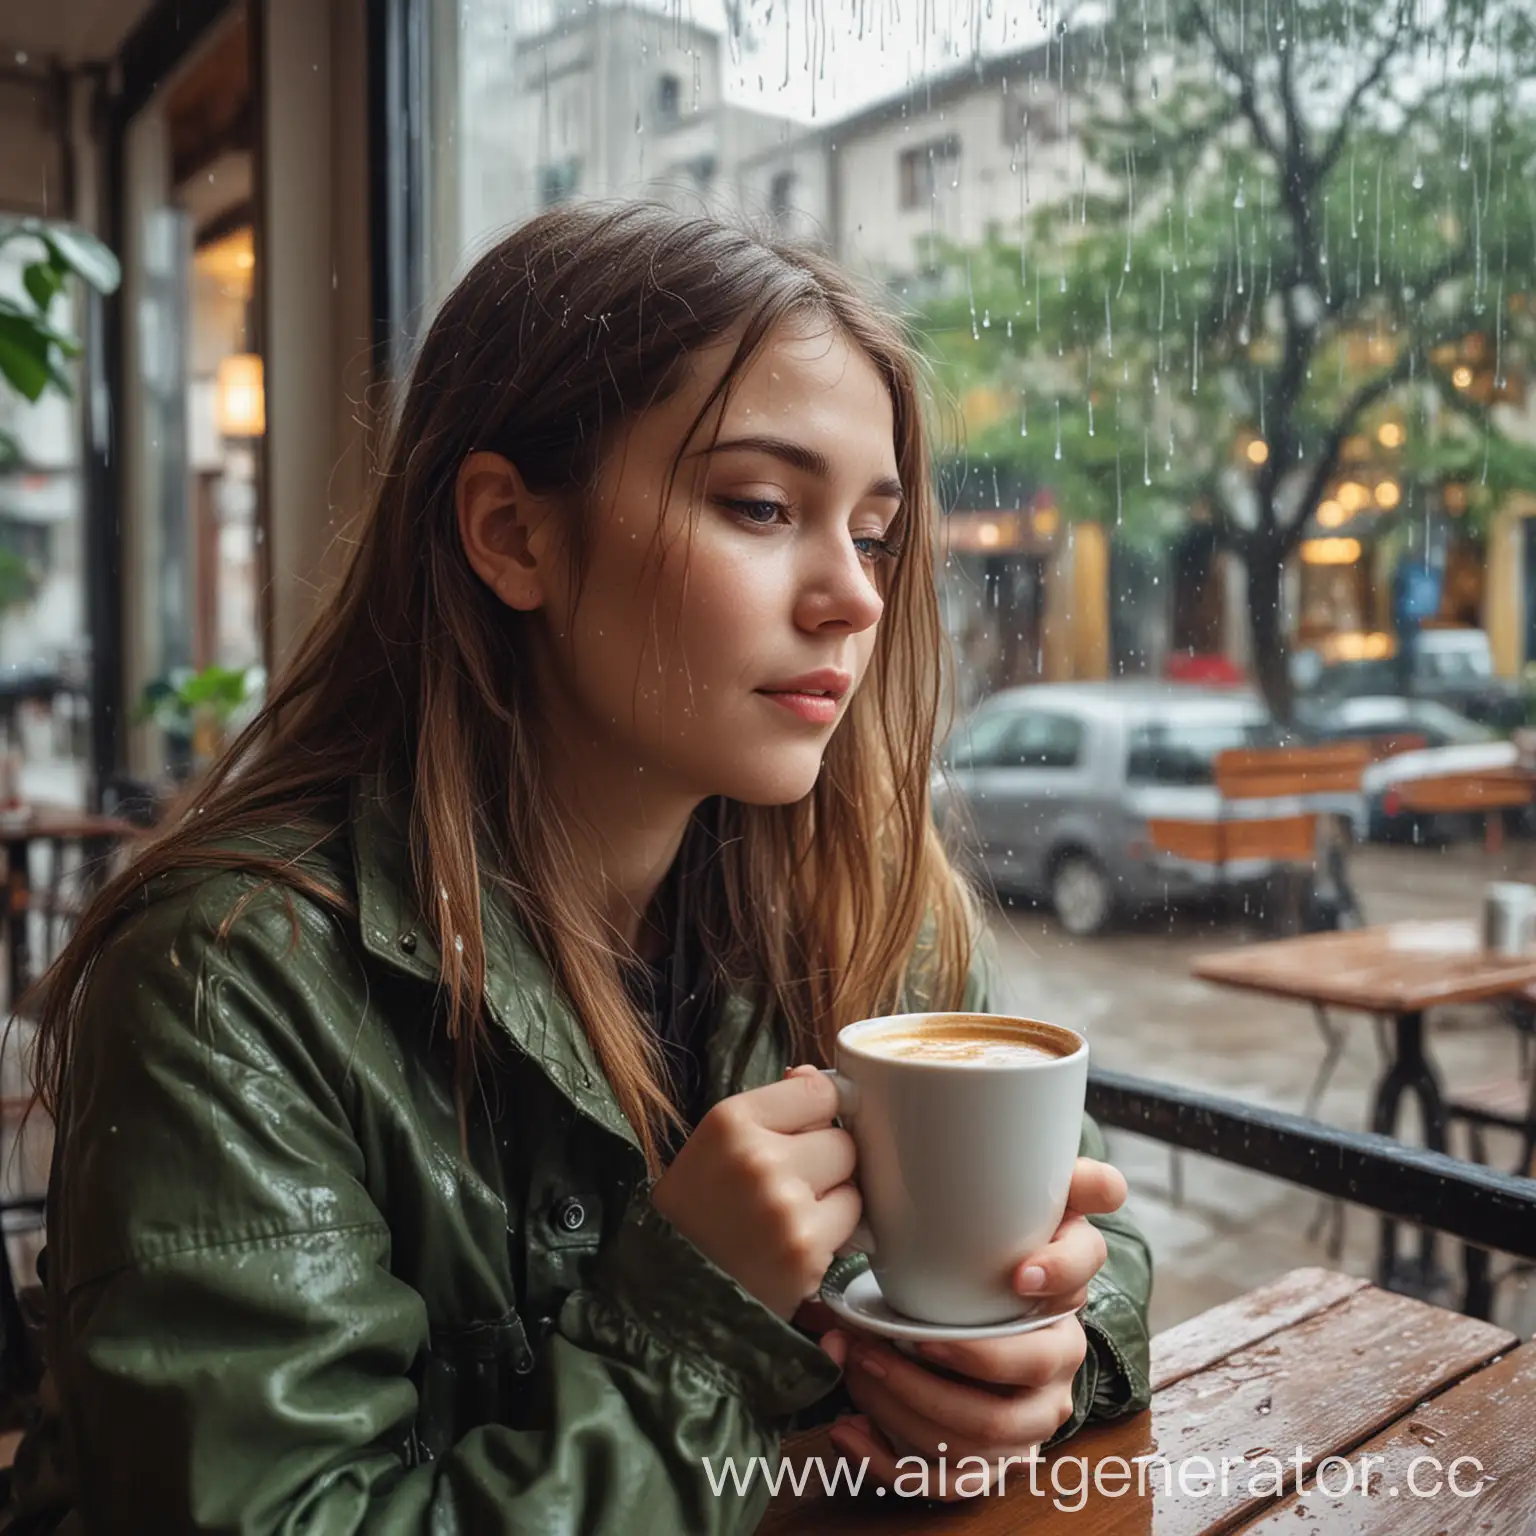 Girl-Enjoying-First-Spring-Rain-in-Cafe-with-Hot-Coffee